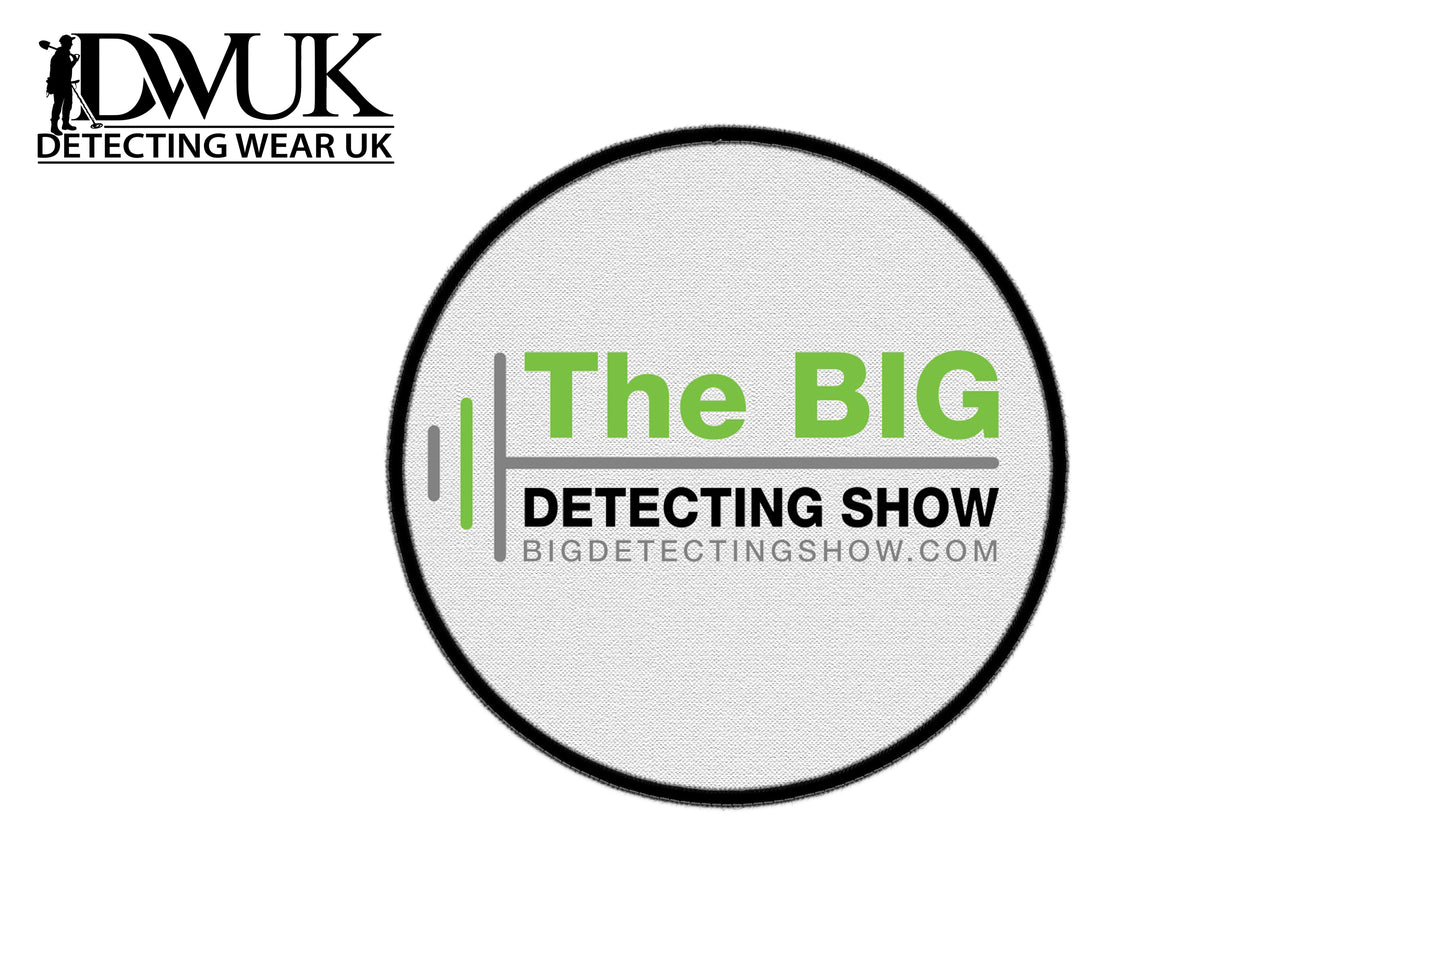 The Big Detecting Show Patch